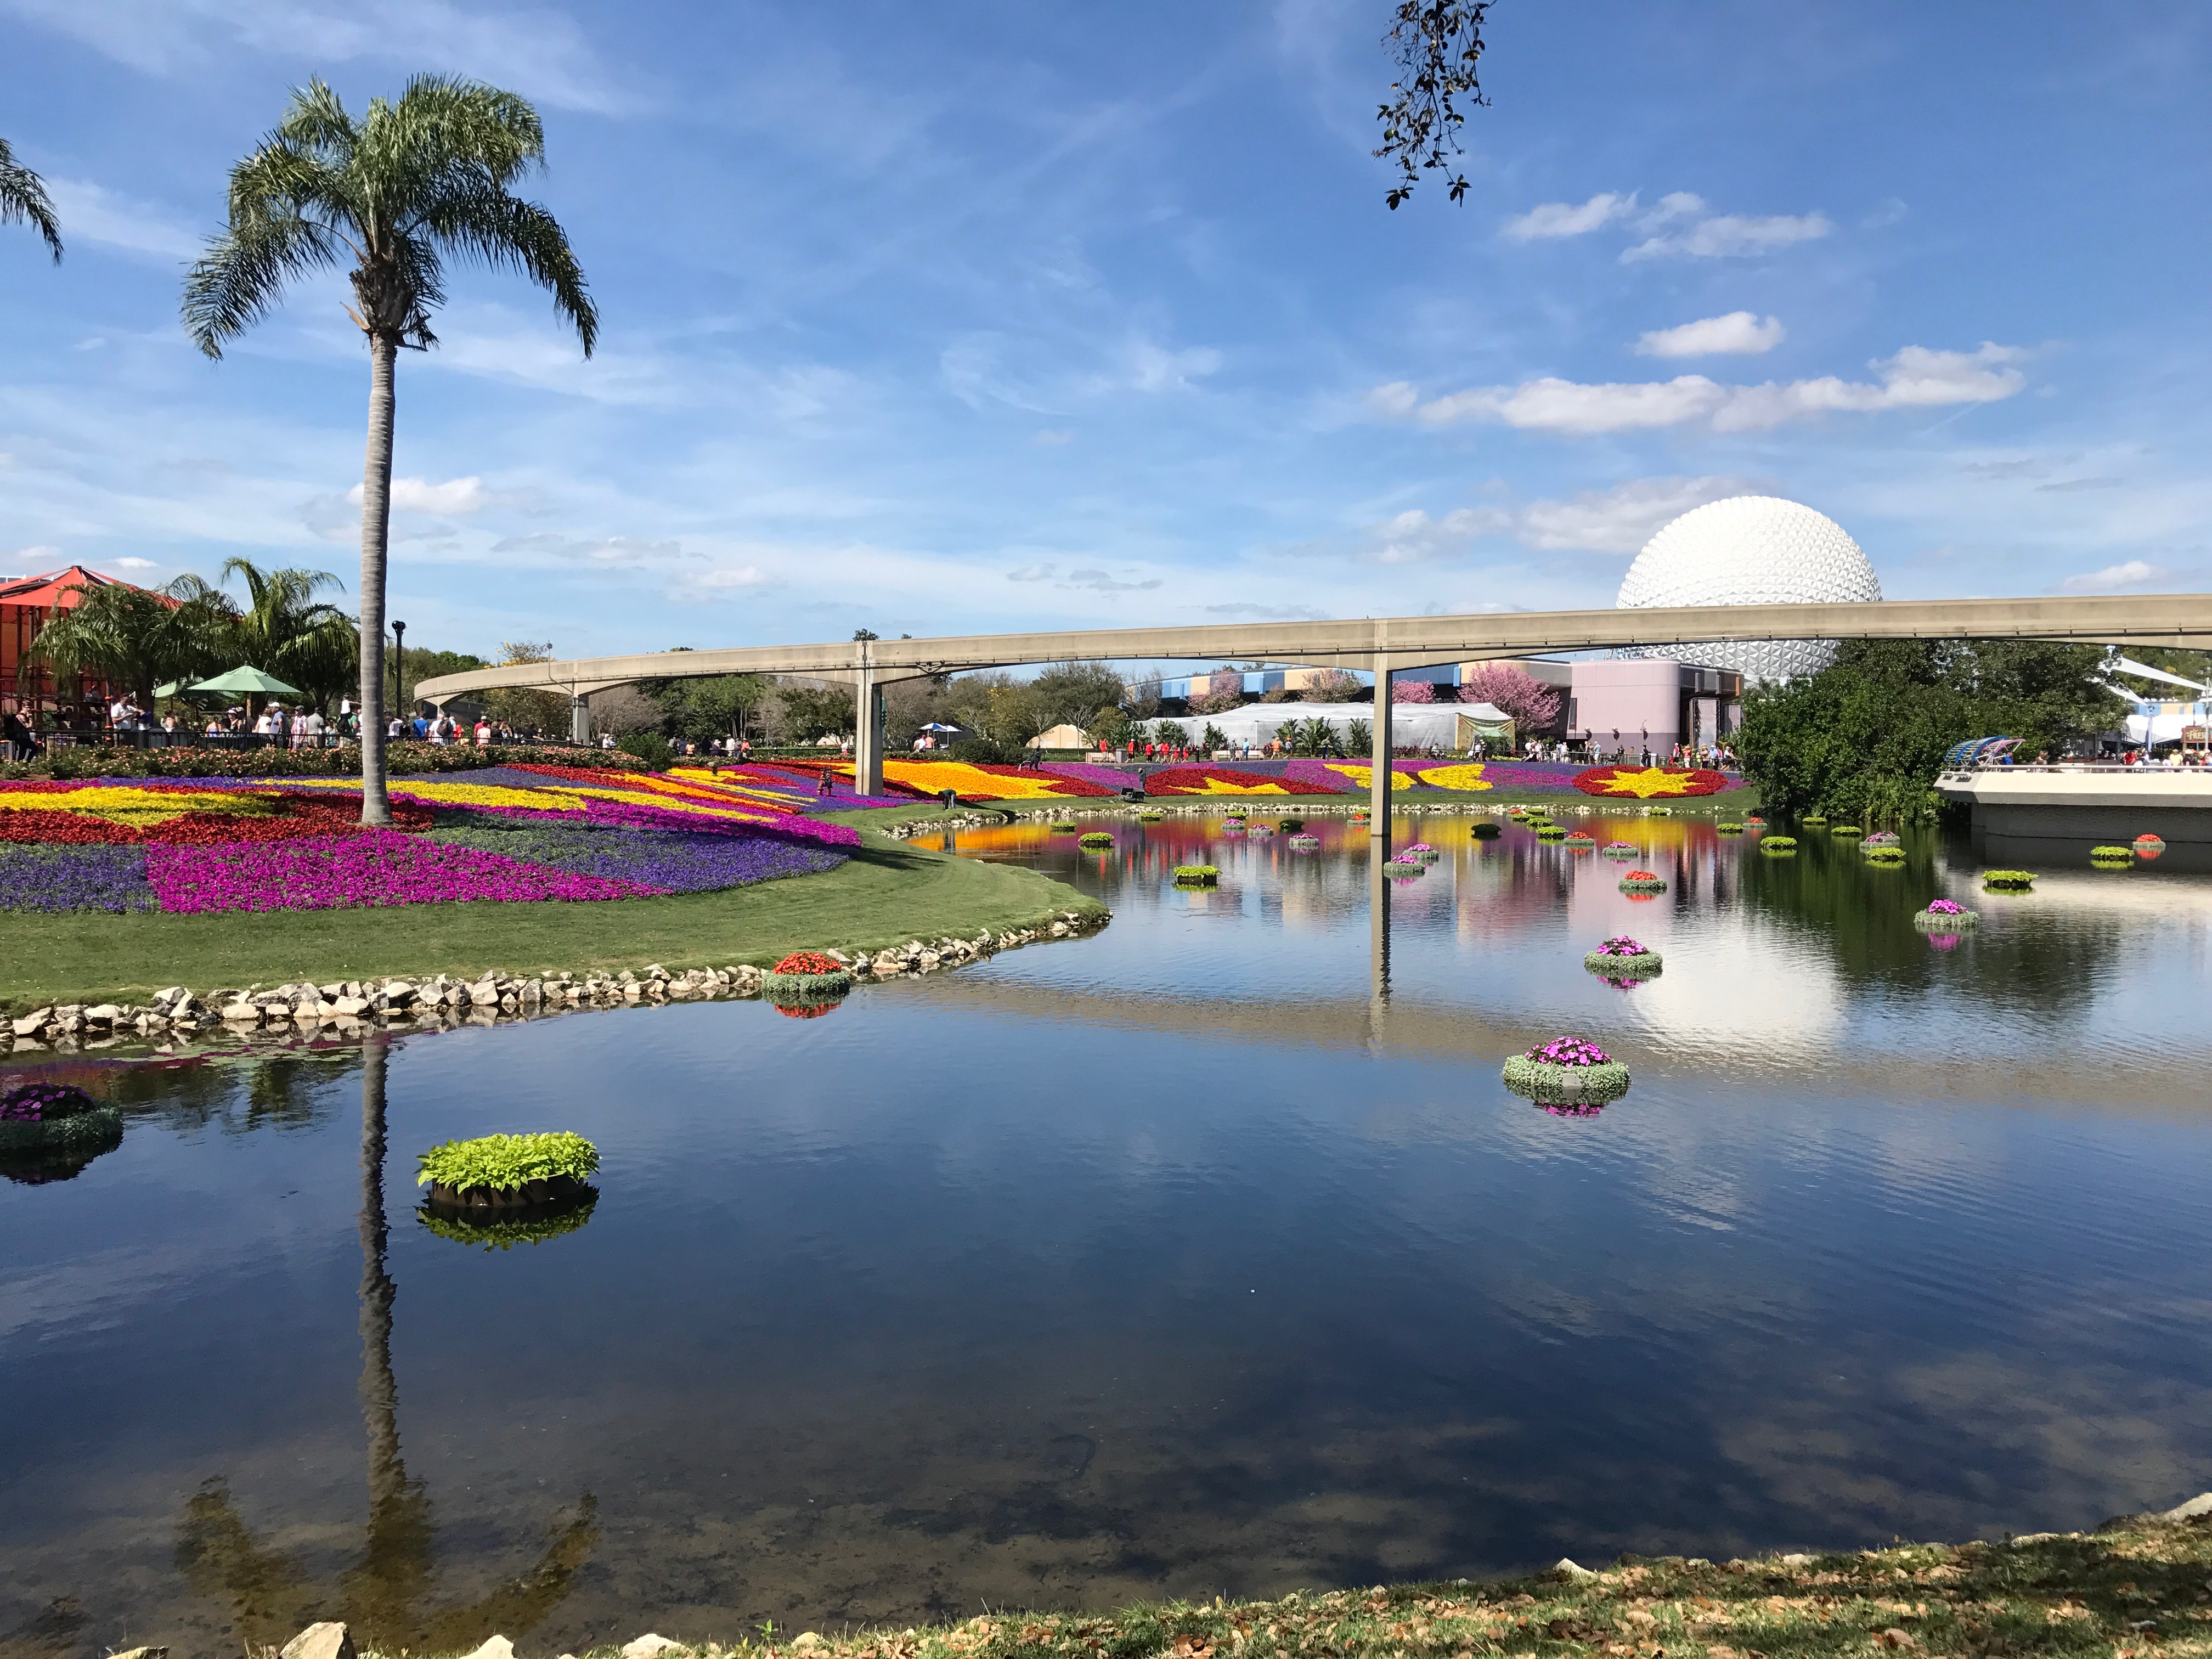 What's In Bloom At The Epcot International Flower & Garden Festival